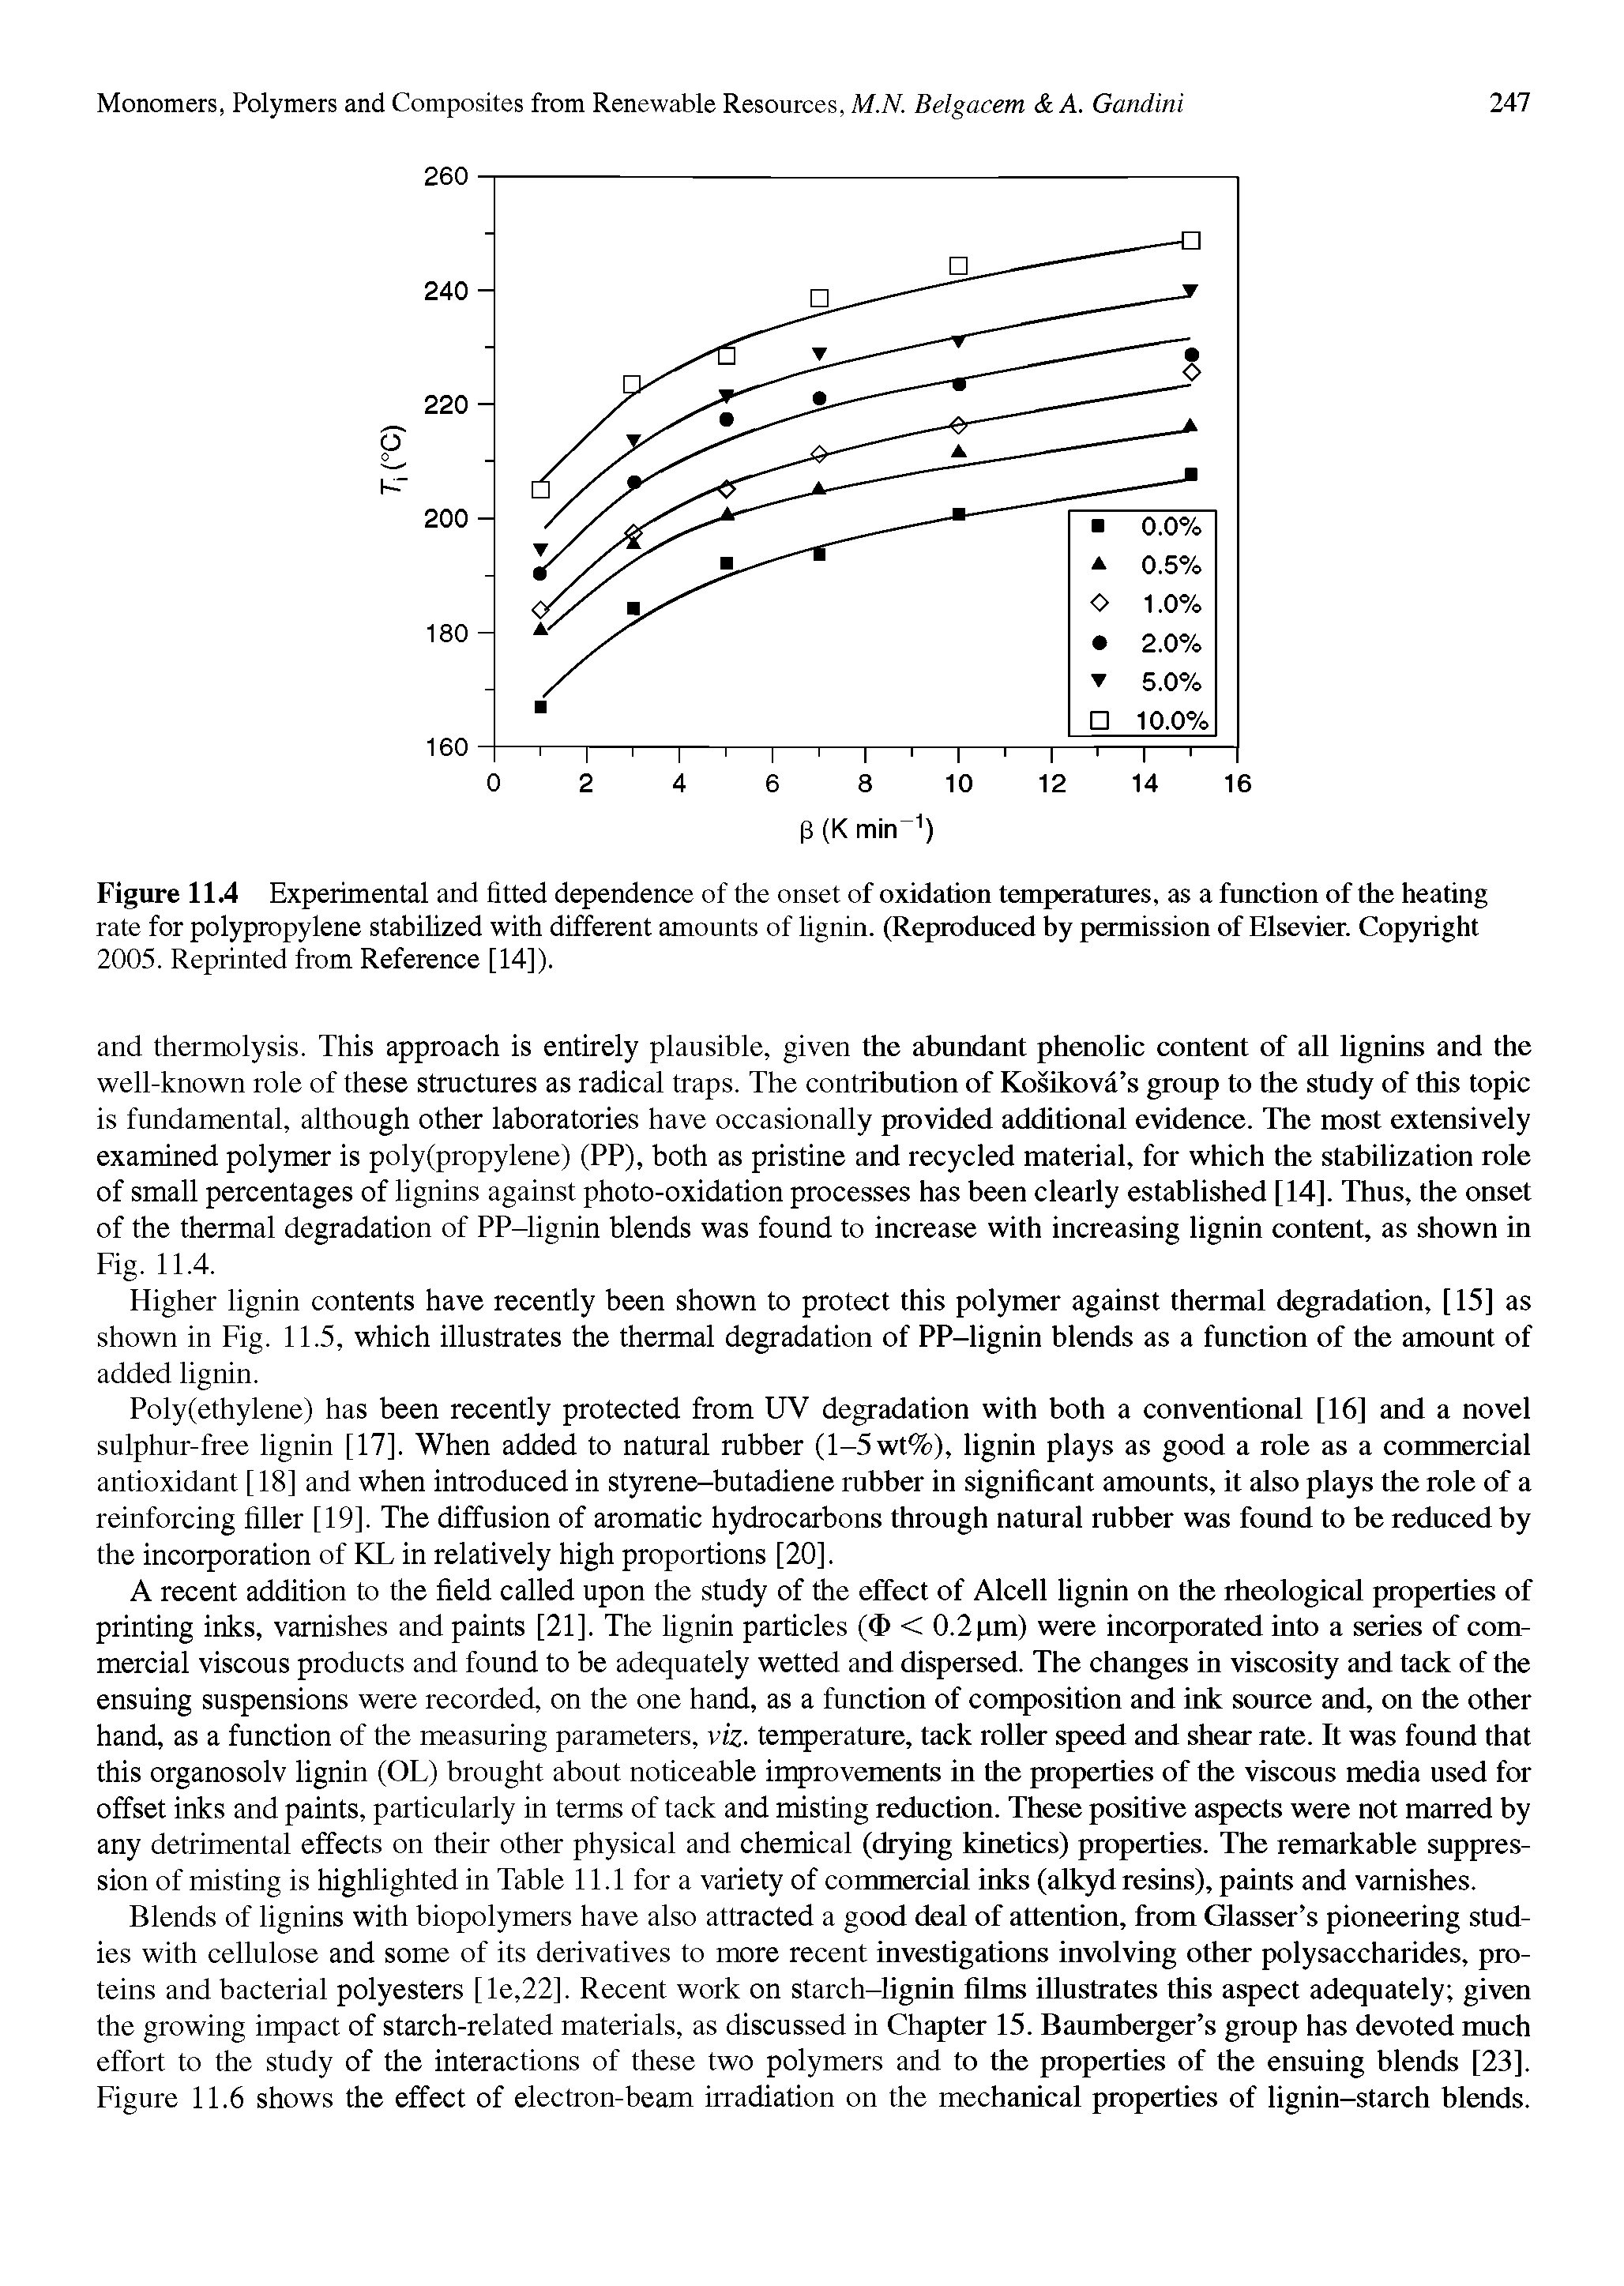 Figure 114 Experimental and fitted dependence of the onset of oxidation temperatures, as a function of the heating rate for polypropylene stabilized with different amounts of lignin. (Reproduced by permission of Elsevier. Copyright 2005. Reprinted from Reference [14]).